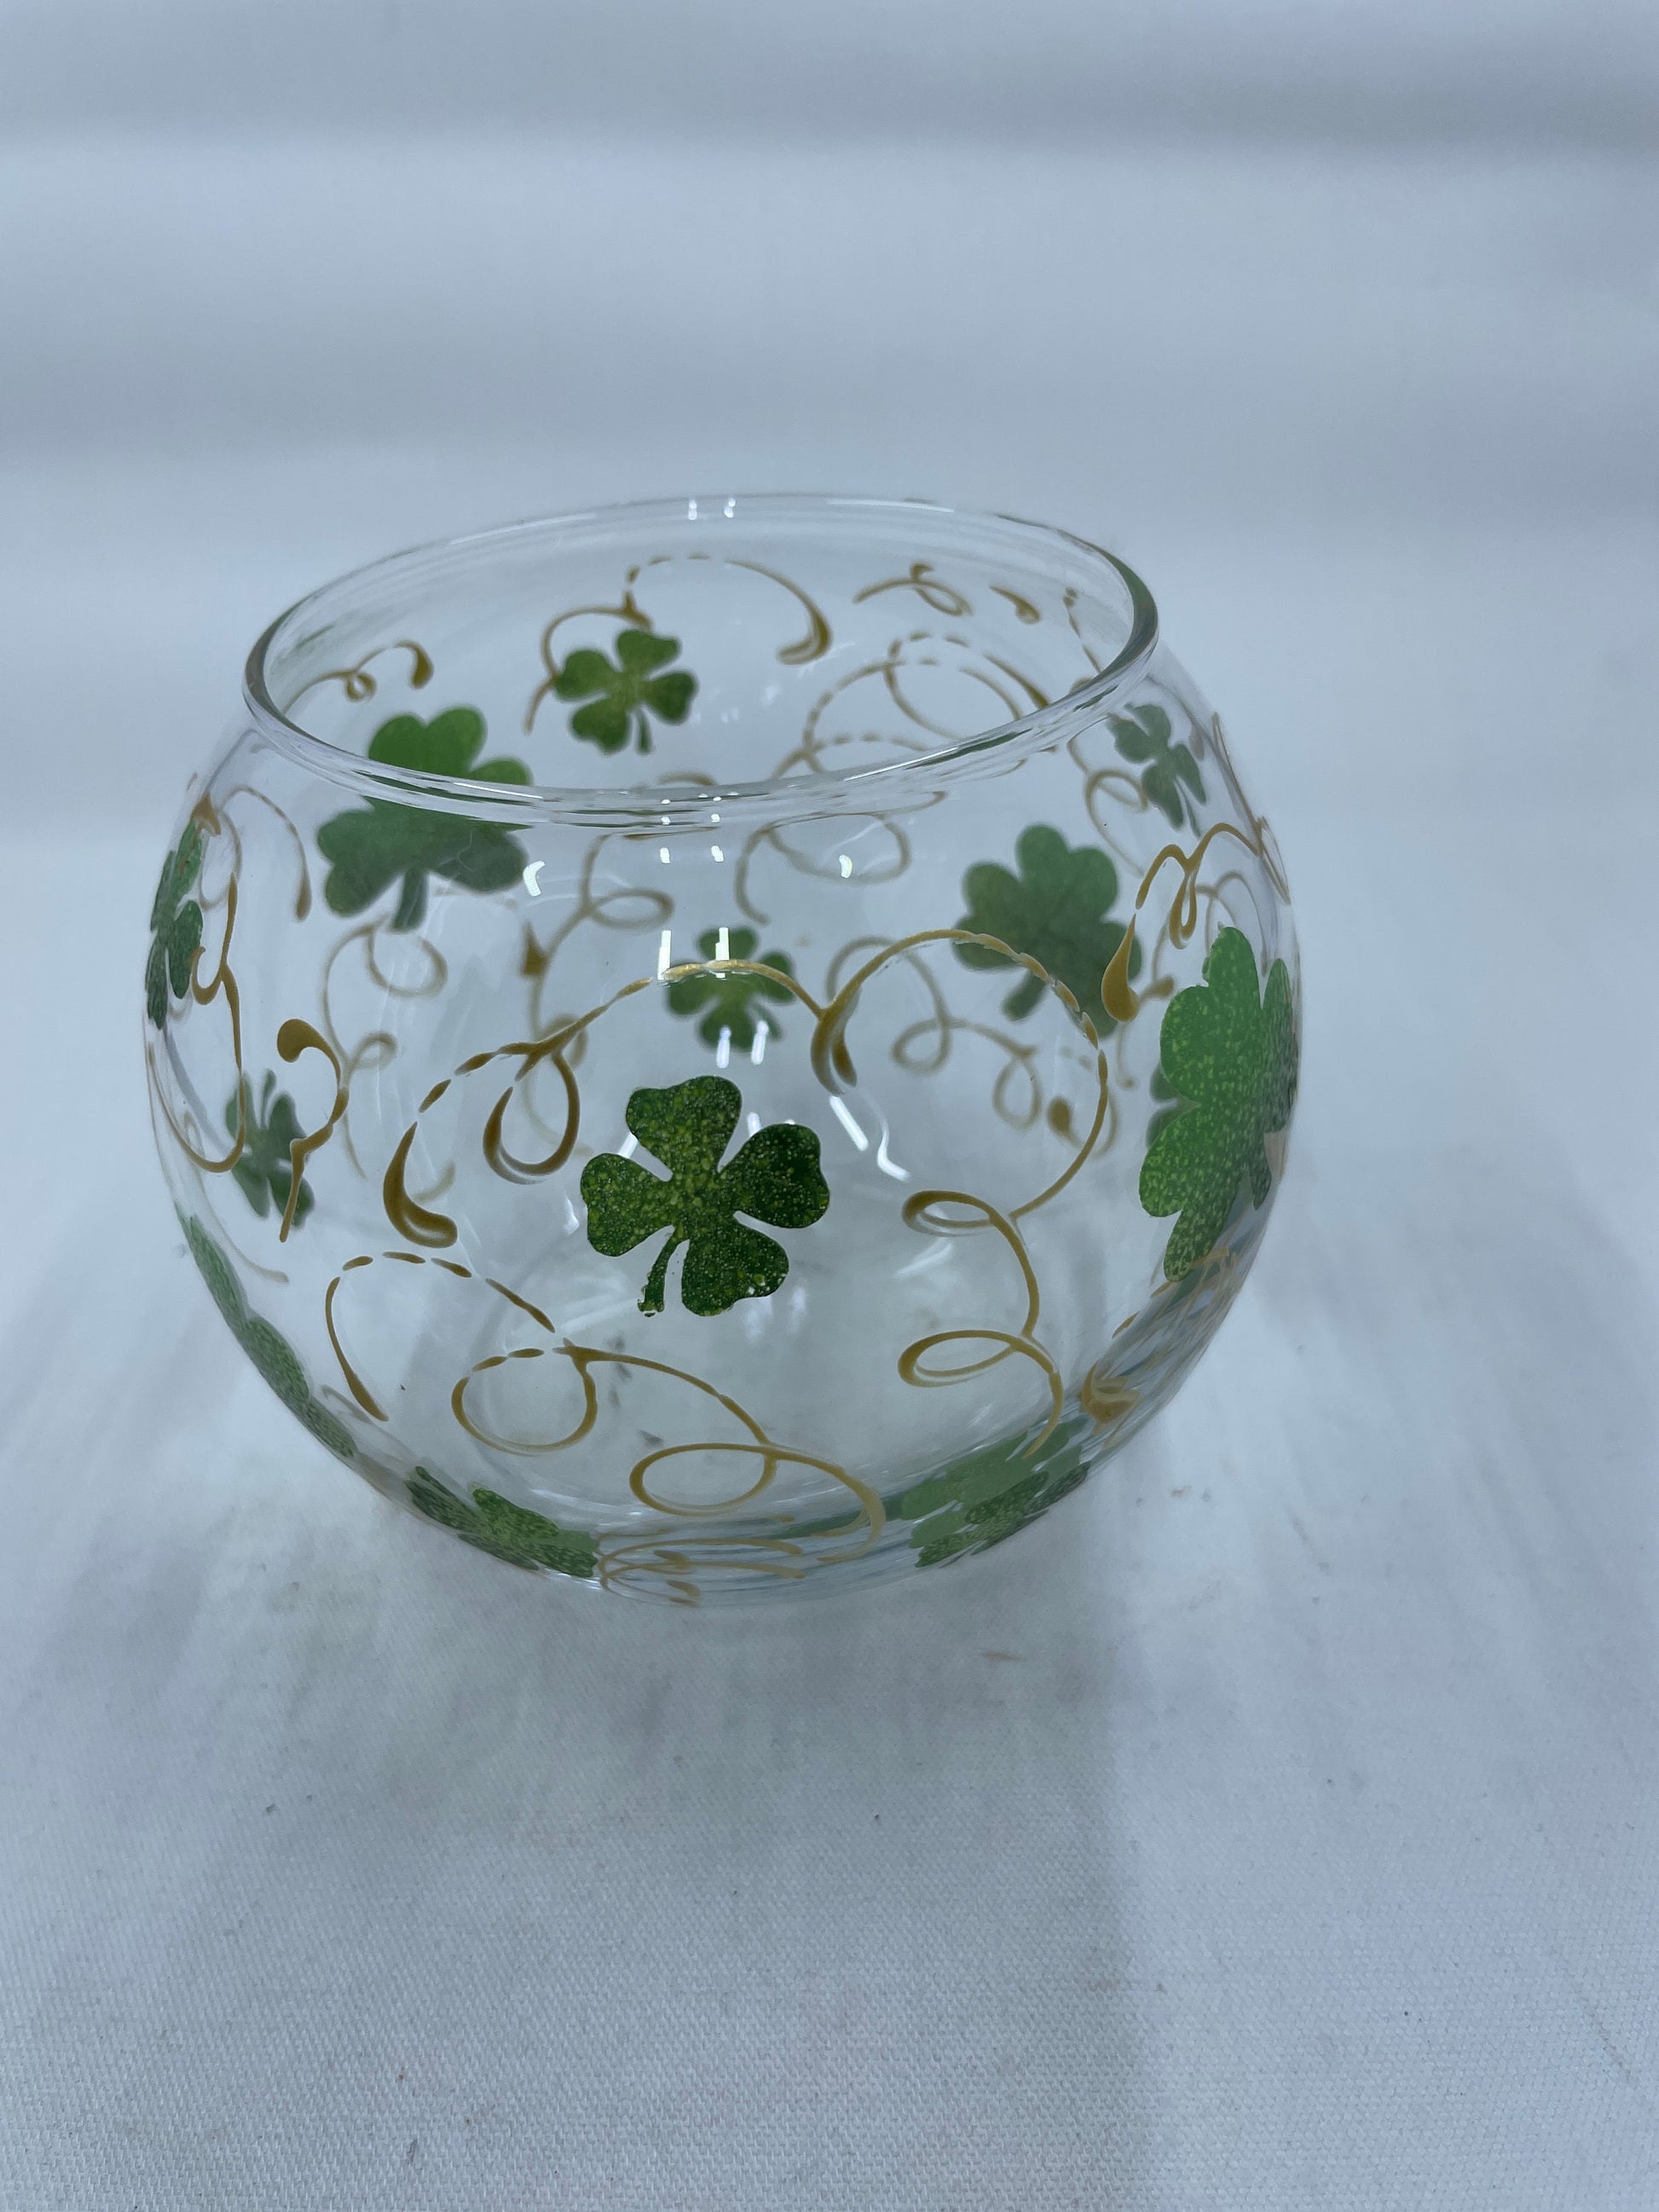 Hand Painted Round Candleholder for St. Patrick’s Day with clover